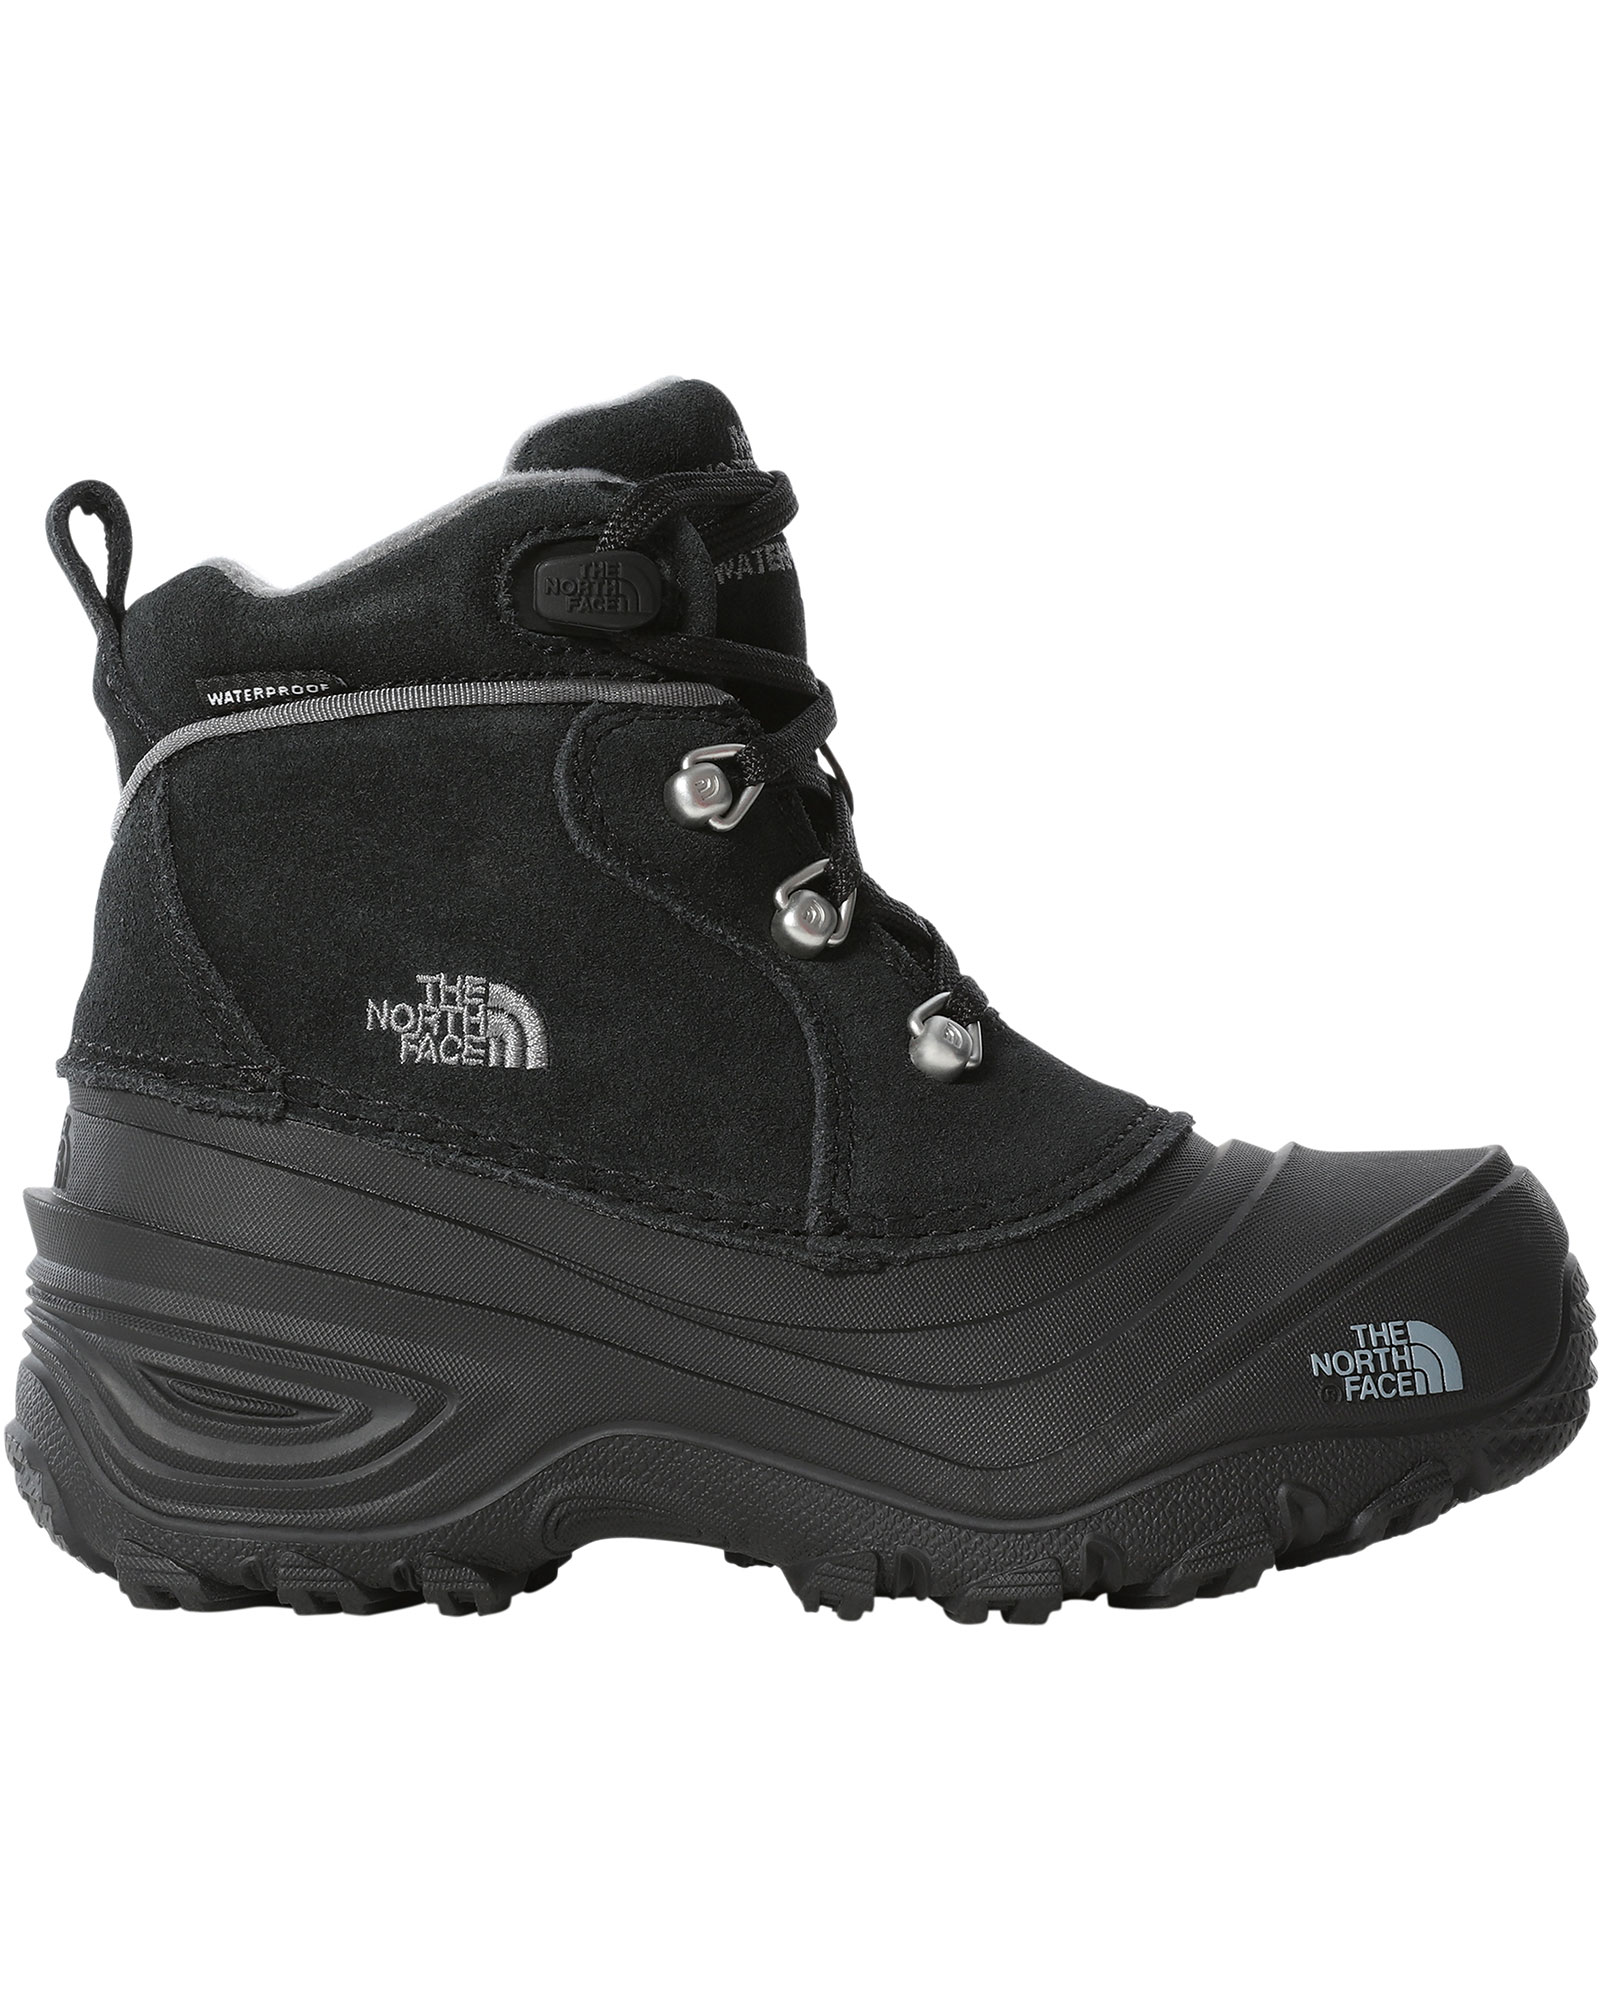 The North Face Chilkat Lace II Kids’ Snow Boots - TNF Black/Zinc Grey UK 13 INF